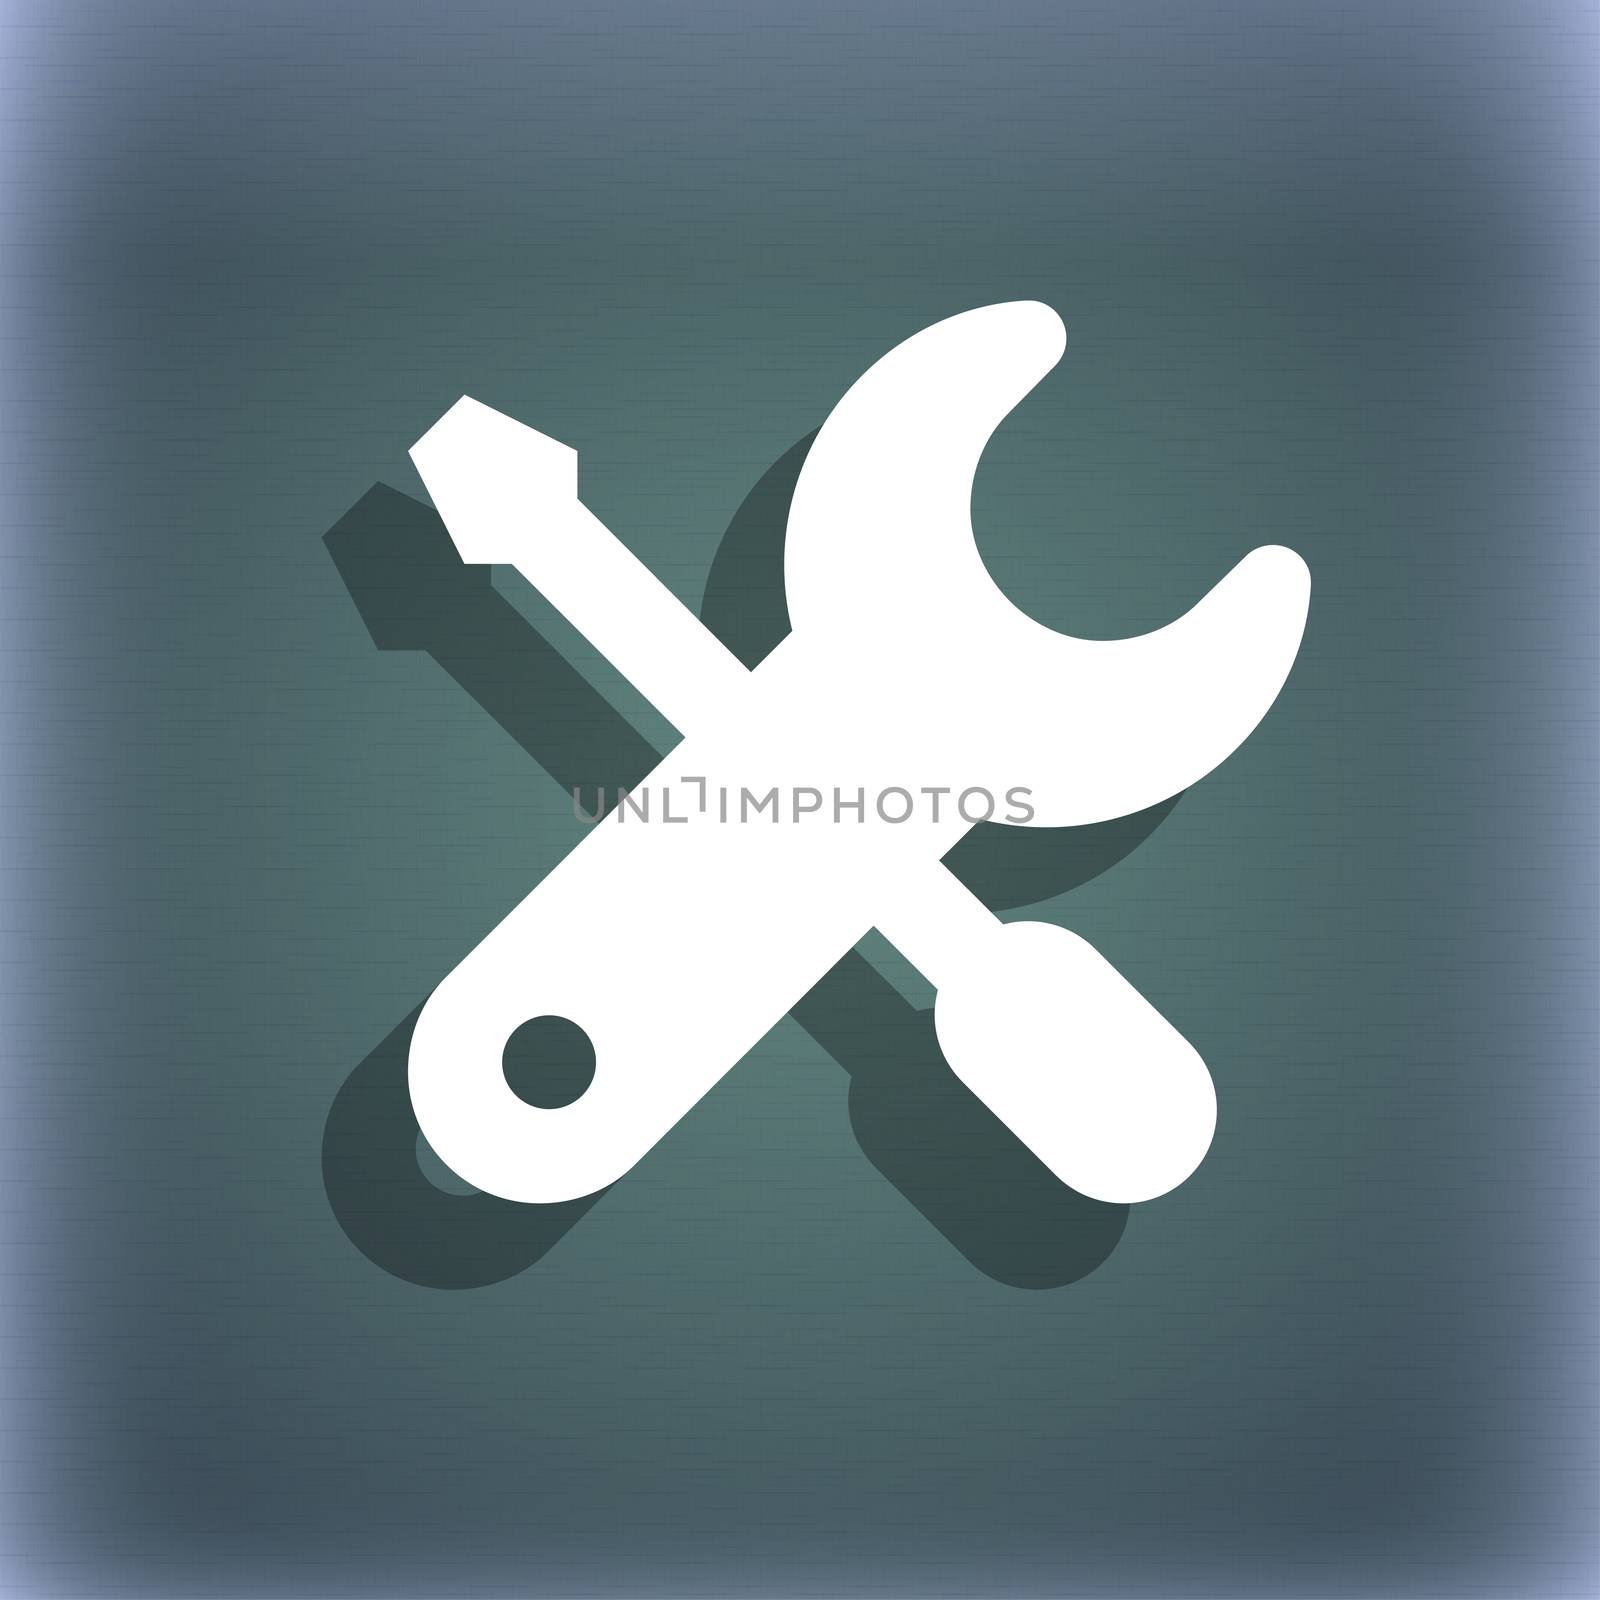 screwdriver, key, settings icon symbol on the blue-green abstract background with shadow and space for your text. illustration